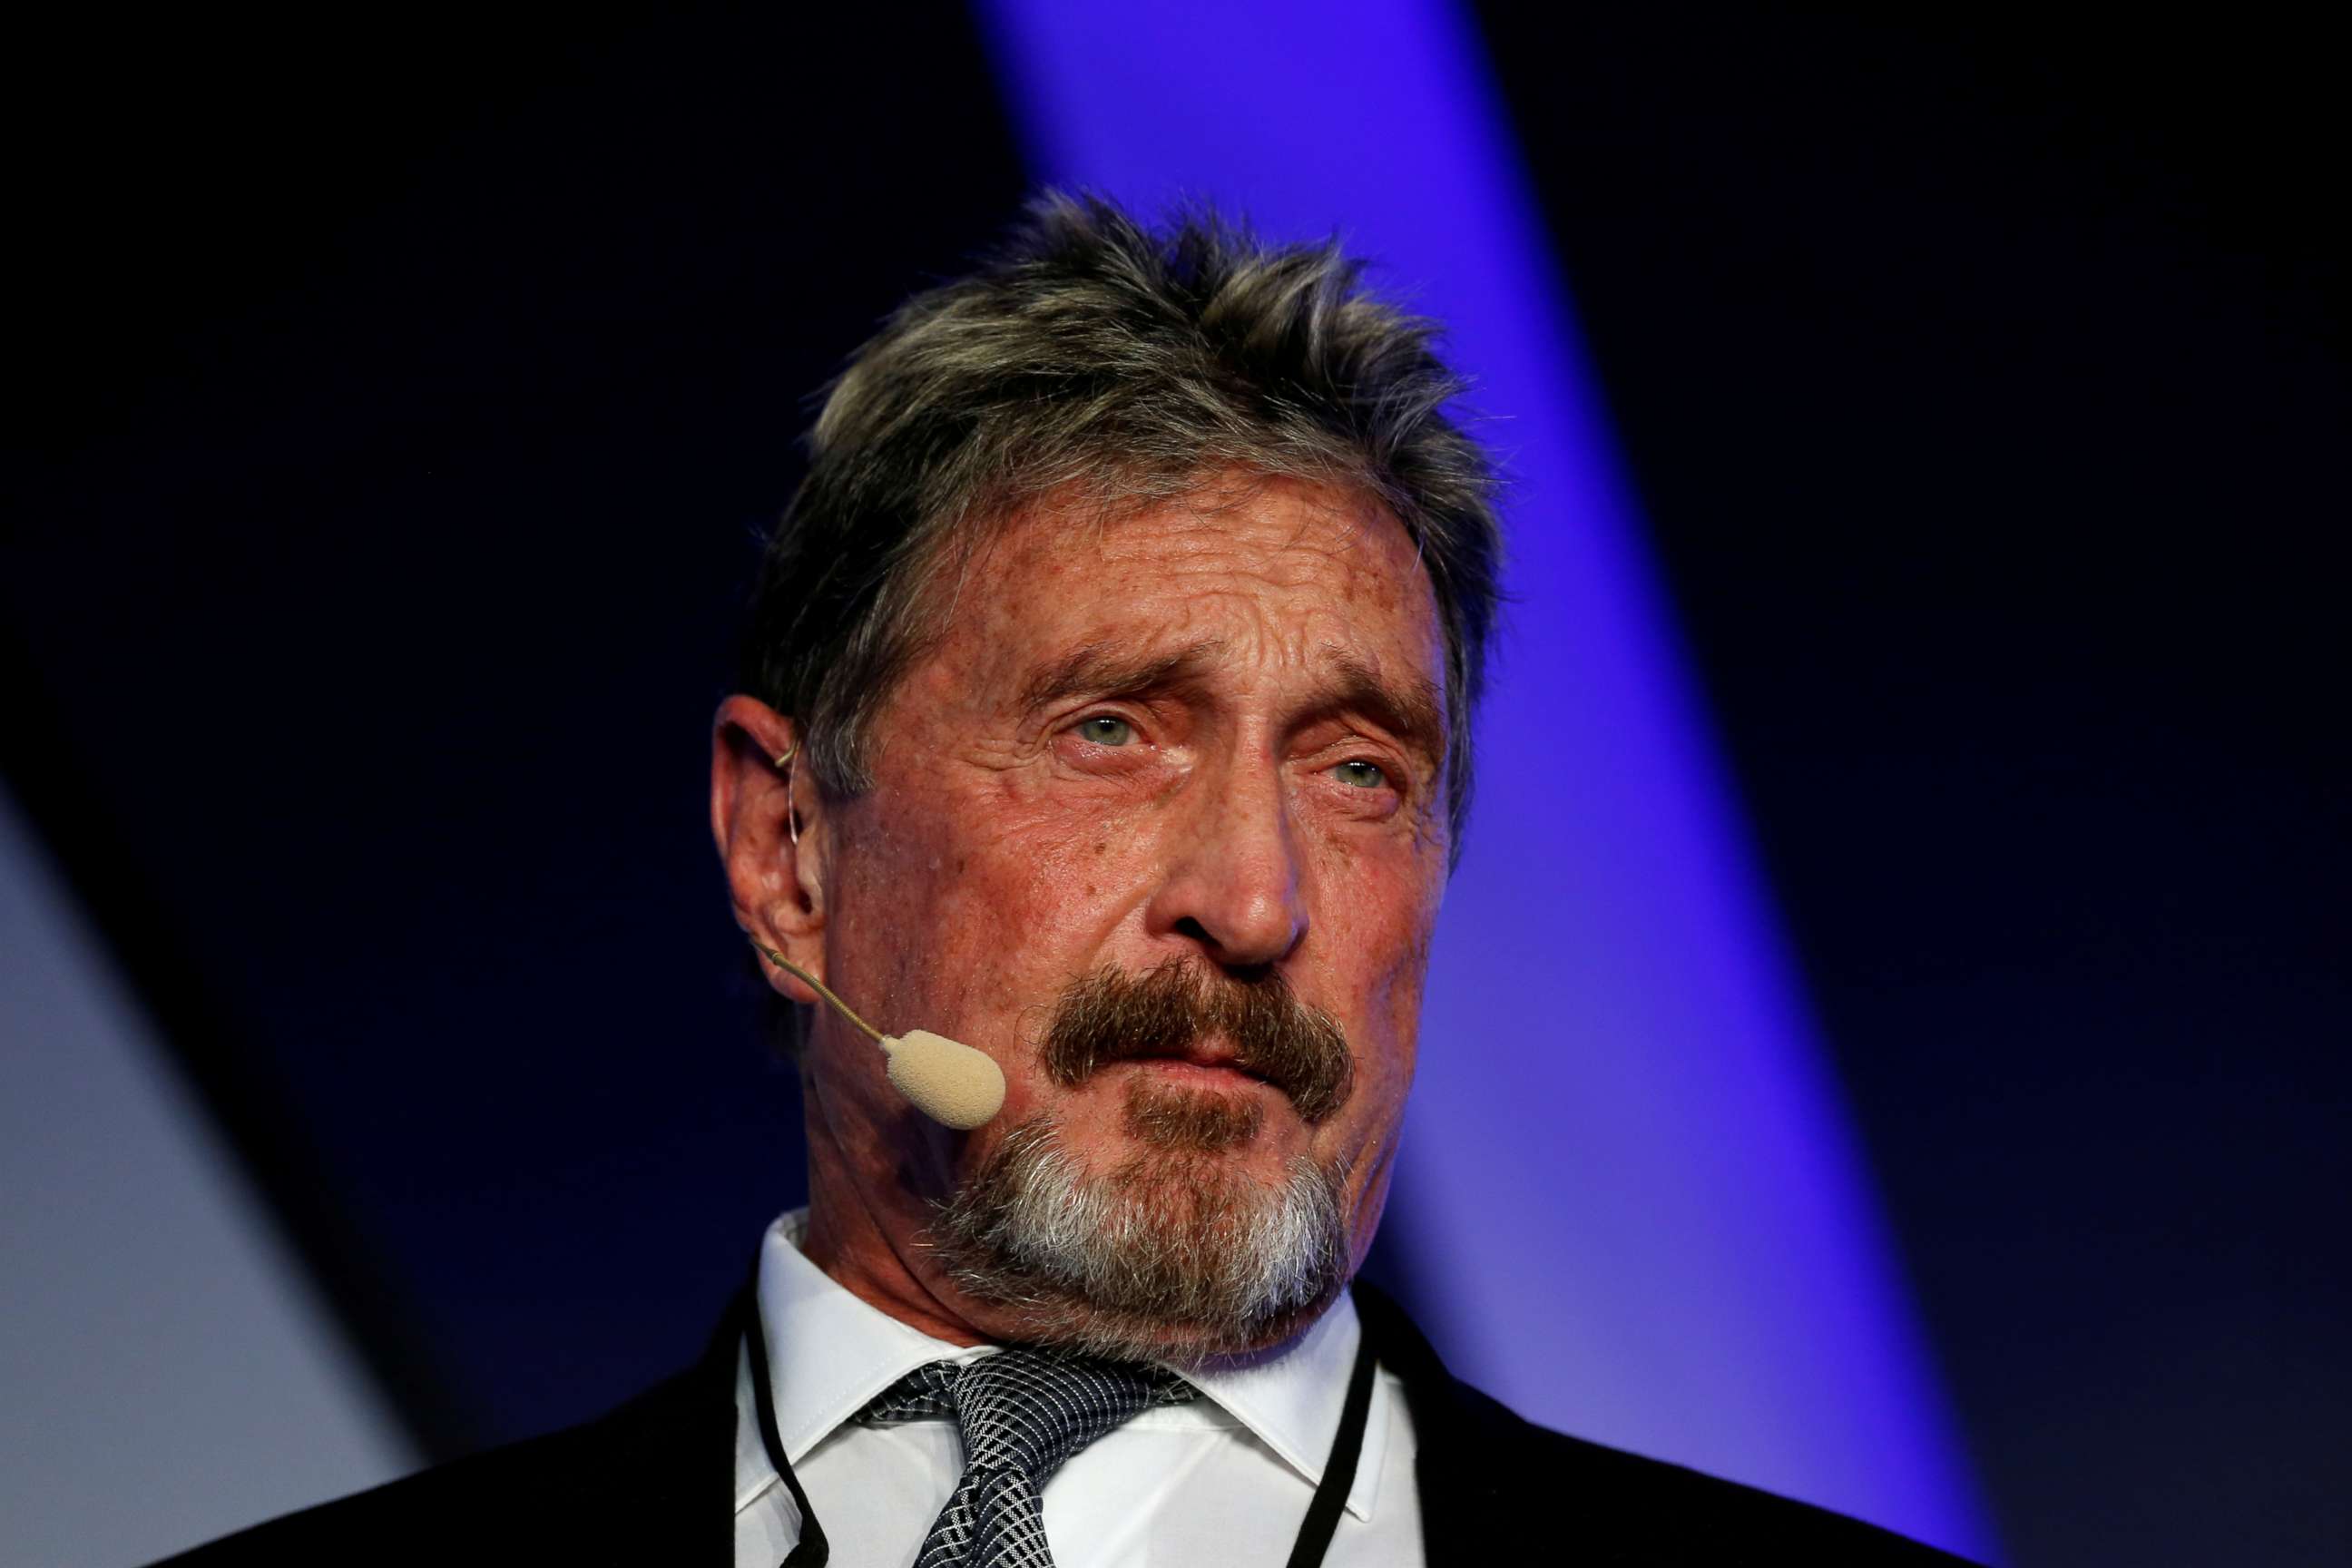 PHOTO: John McAfee, co-founder of McAfee Crypto Team and founder of McAfee Antivirus, speaks at the Malta Blockchain Summit in St. Julian's, Malta, in this Nov. 1, 2018, file photo.